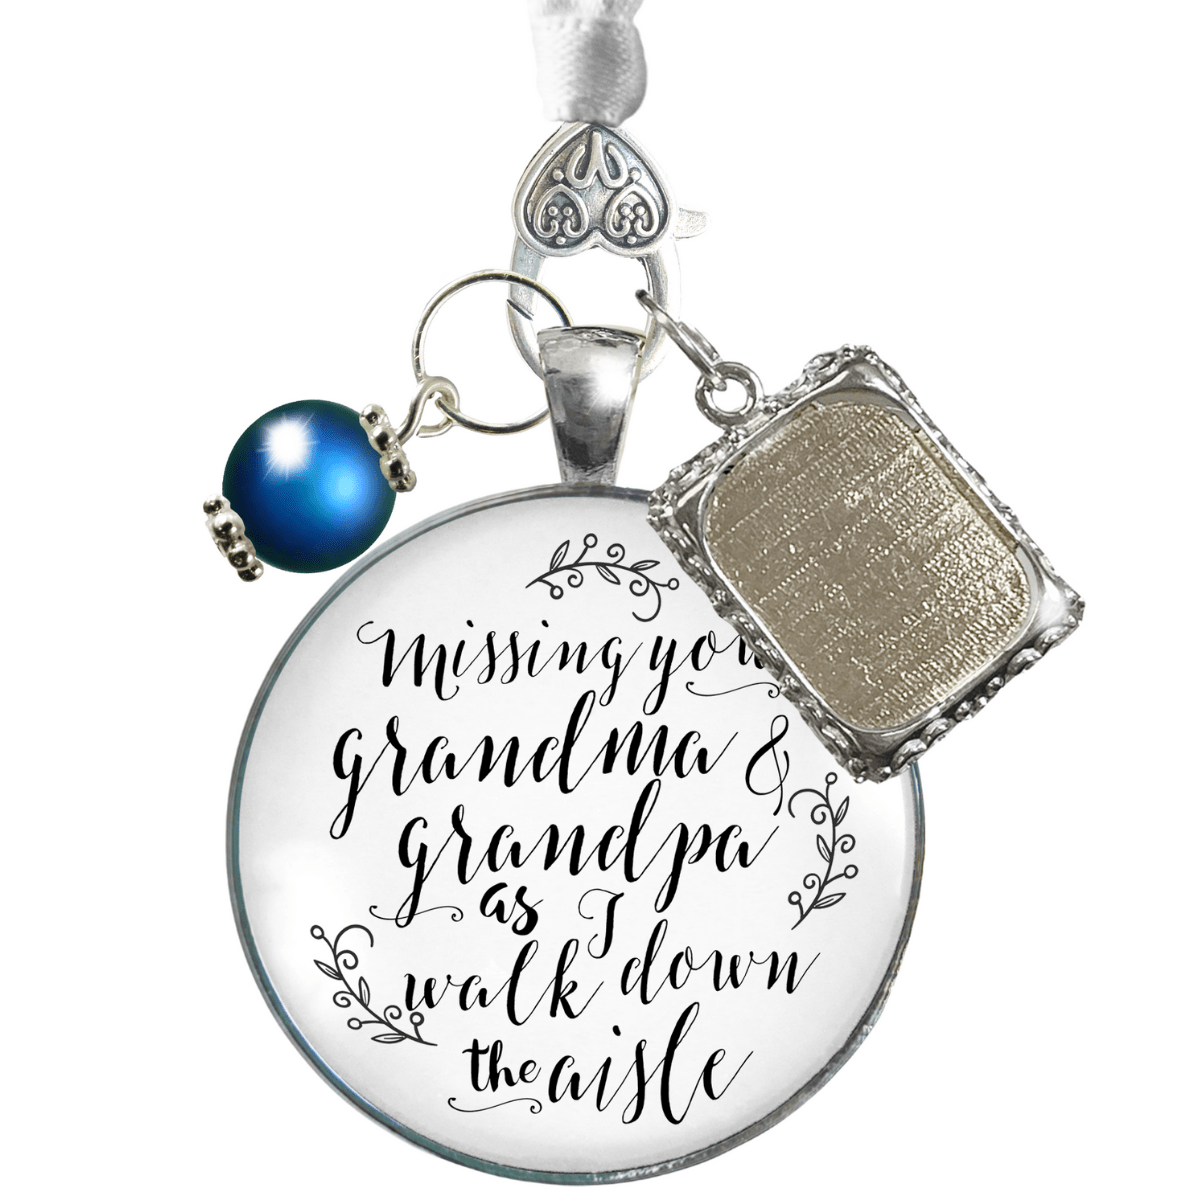 Wedding Memory Bouquet Charm Missing Grandma and Grandpa 2 Frames Bridal  Memorial White Silver Finish DIY Picture Template